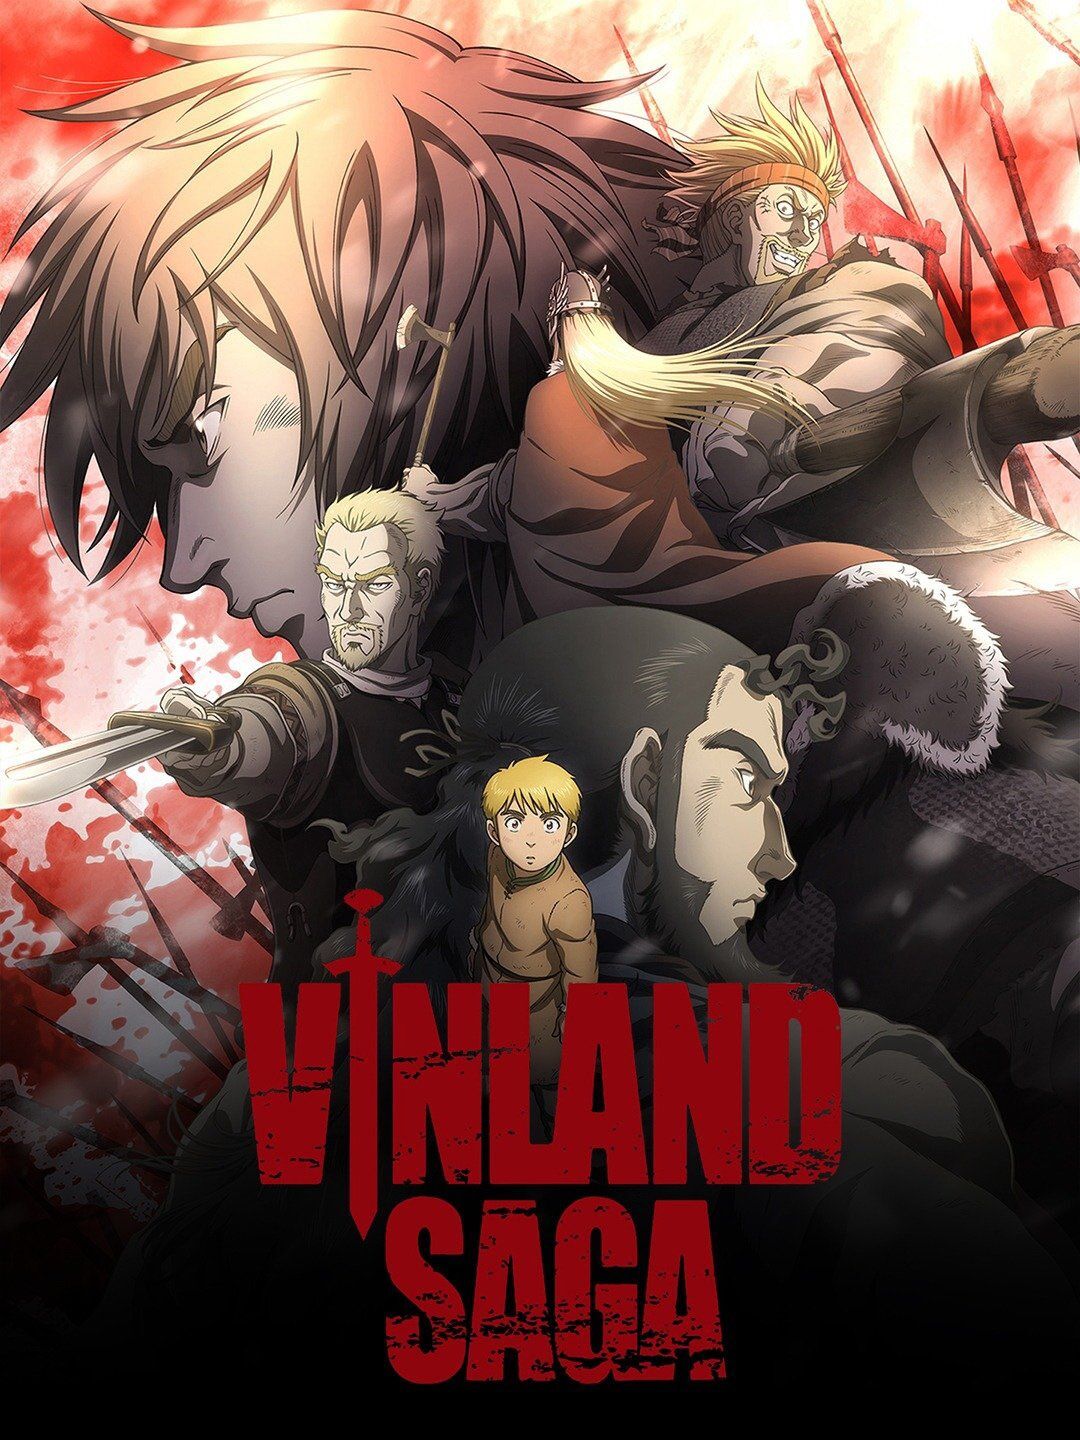 Vinland Saga Season 2 Voice Actors, Who Are the Japanese and